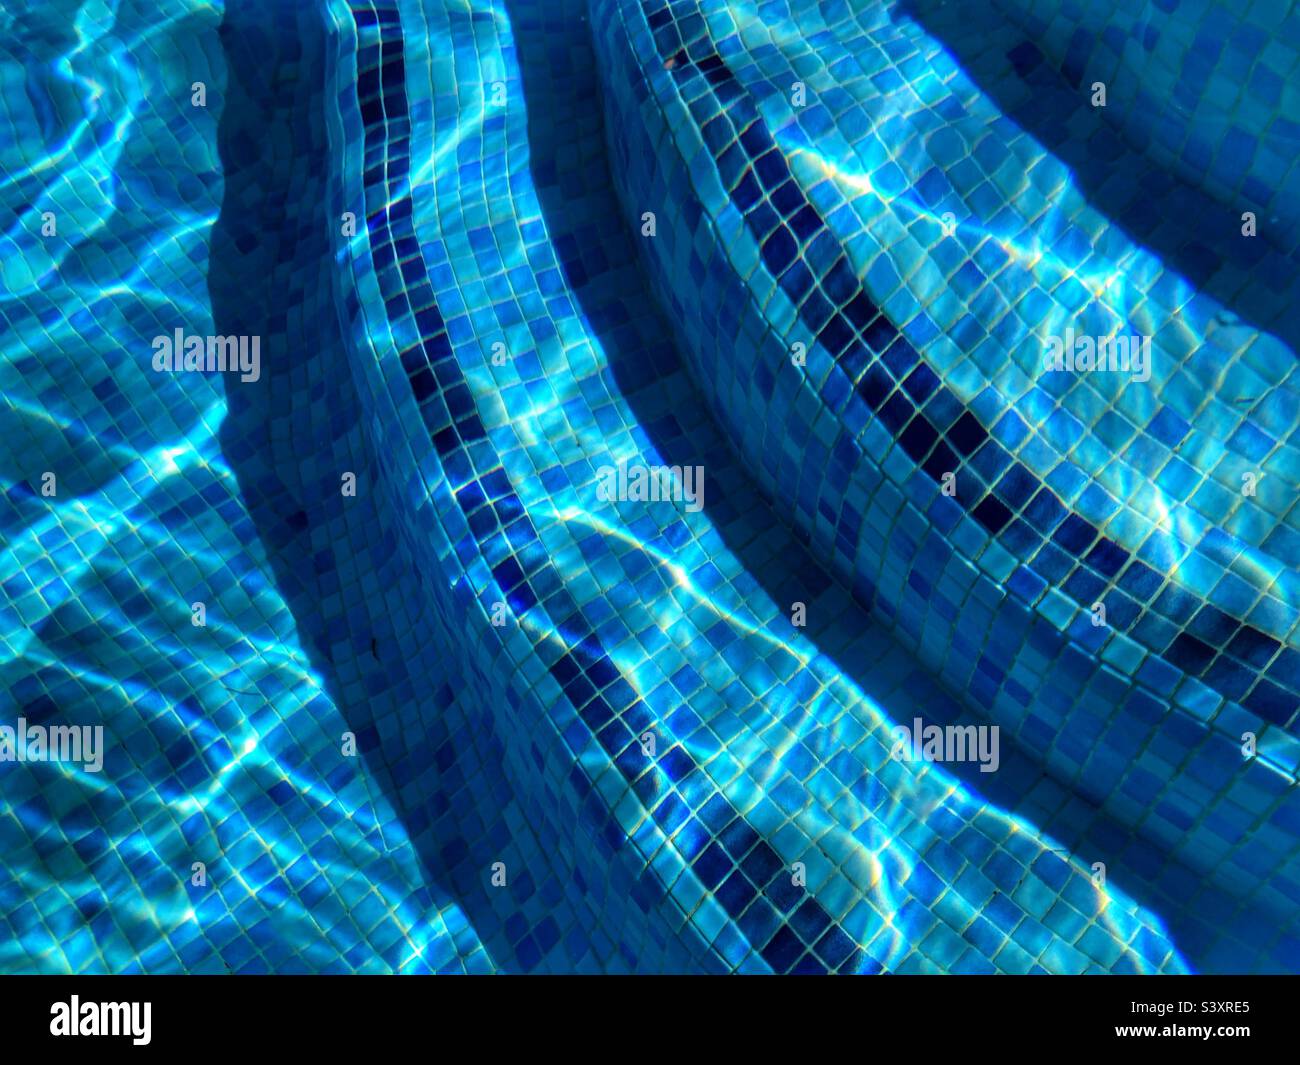 Swimming pool detail, blue tiled steps with light refractions and ripples. Abstract background Stock Photo